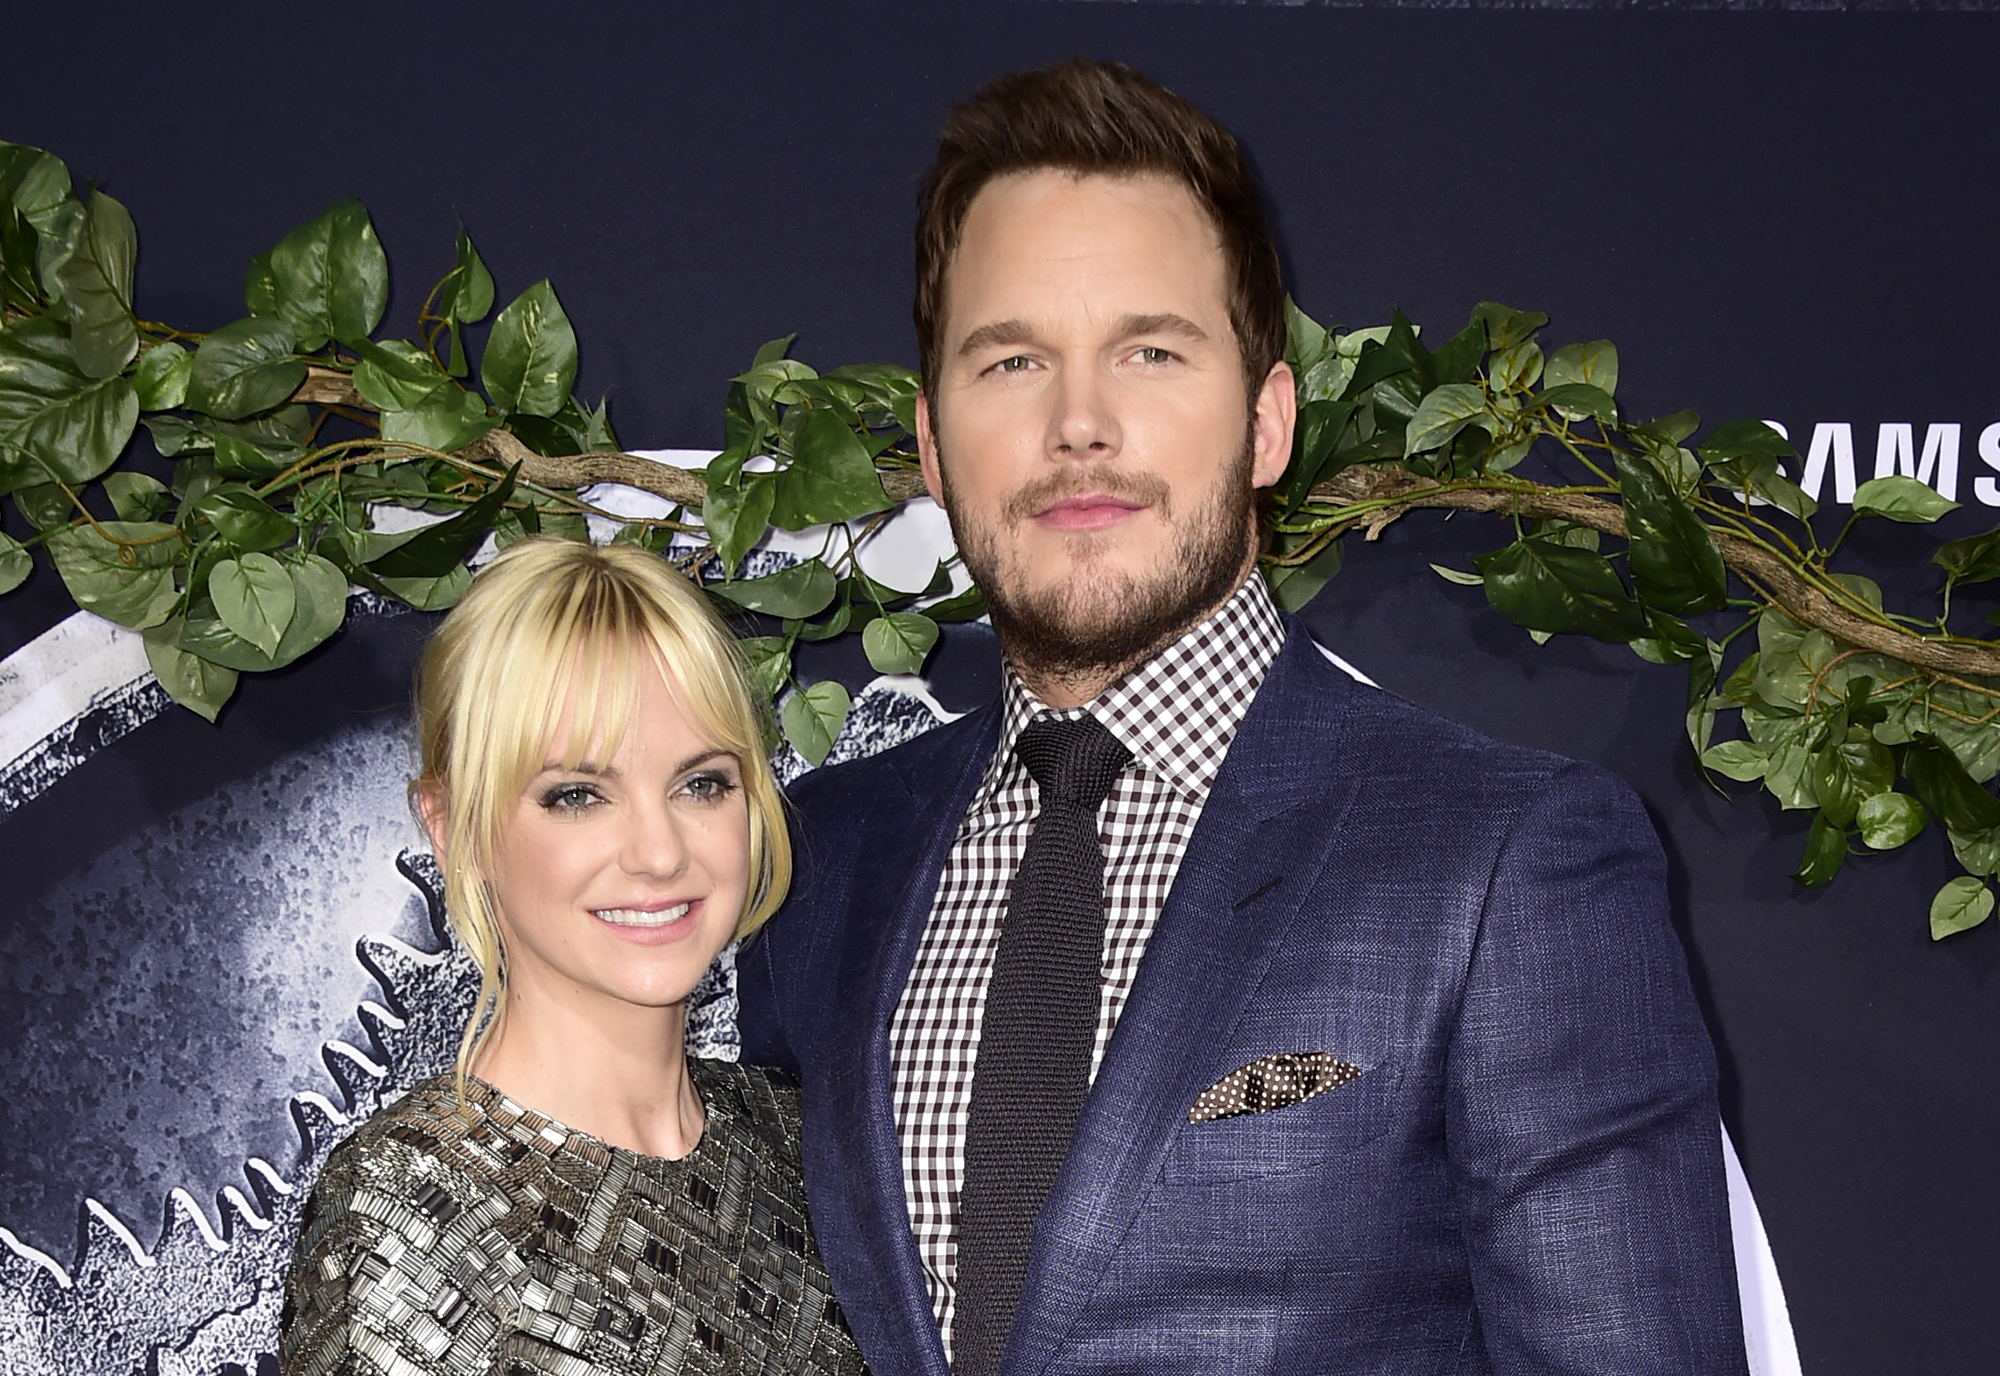 Anna Faris and Chris Pratt attend the Universal Pictures' "Jurassic World" premiere at Dolby Theatre on June 9, 2015 in Hollywood, California.  (Photo by Frazer Harrison/Getty Images) (Frazer Harrison&mdash;Getty Images)